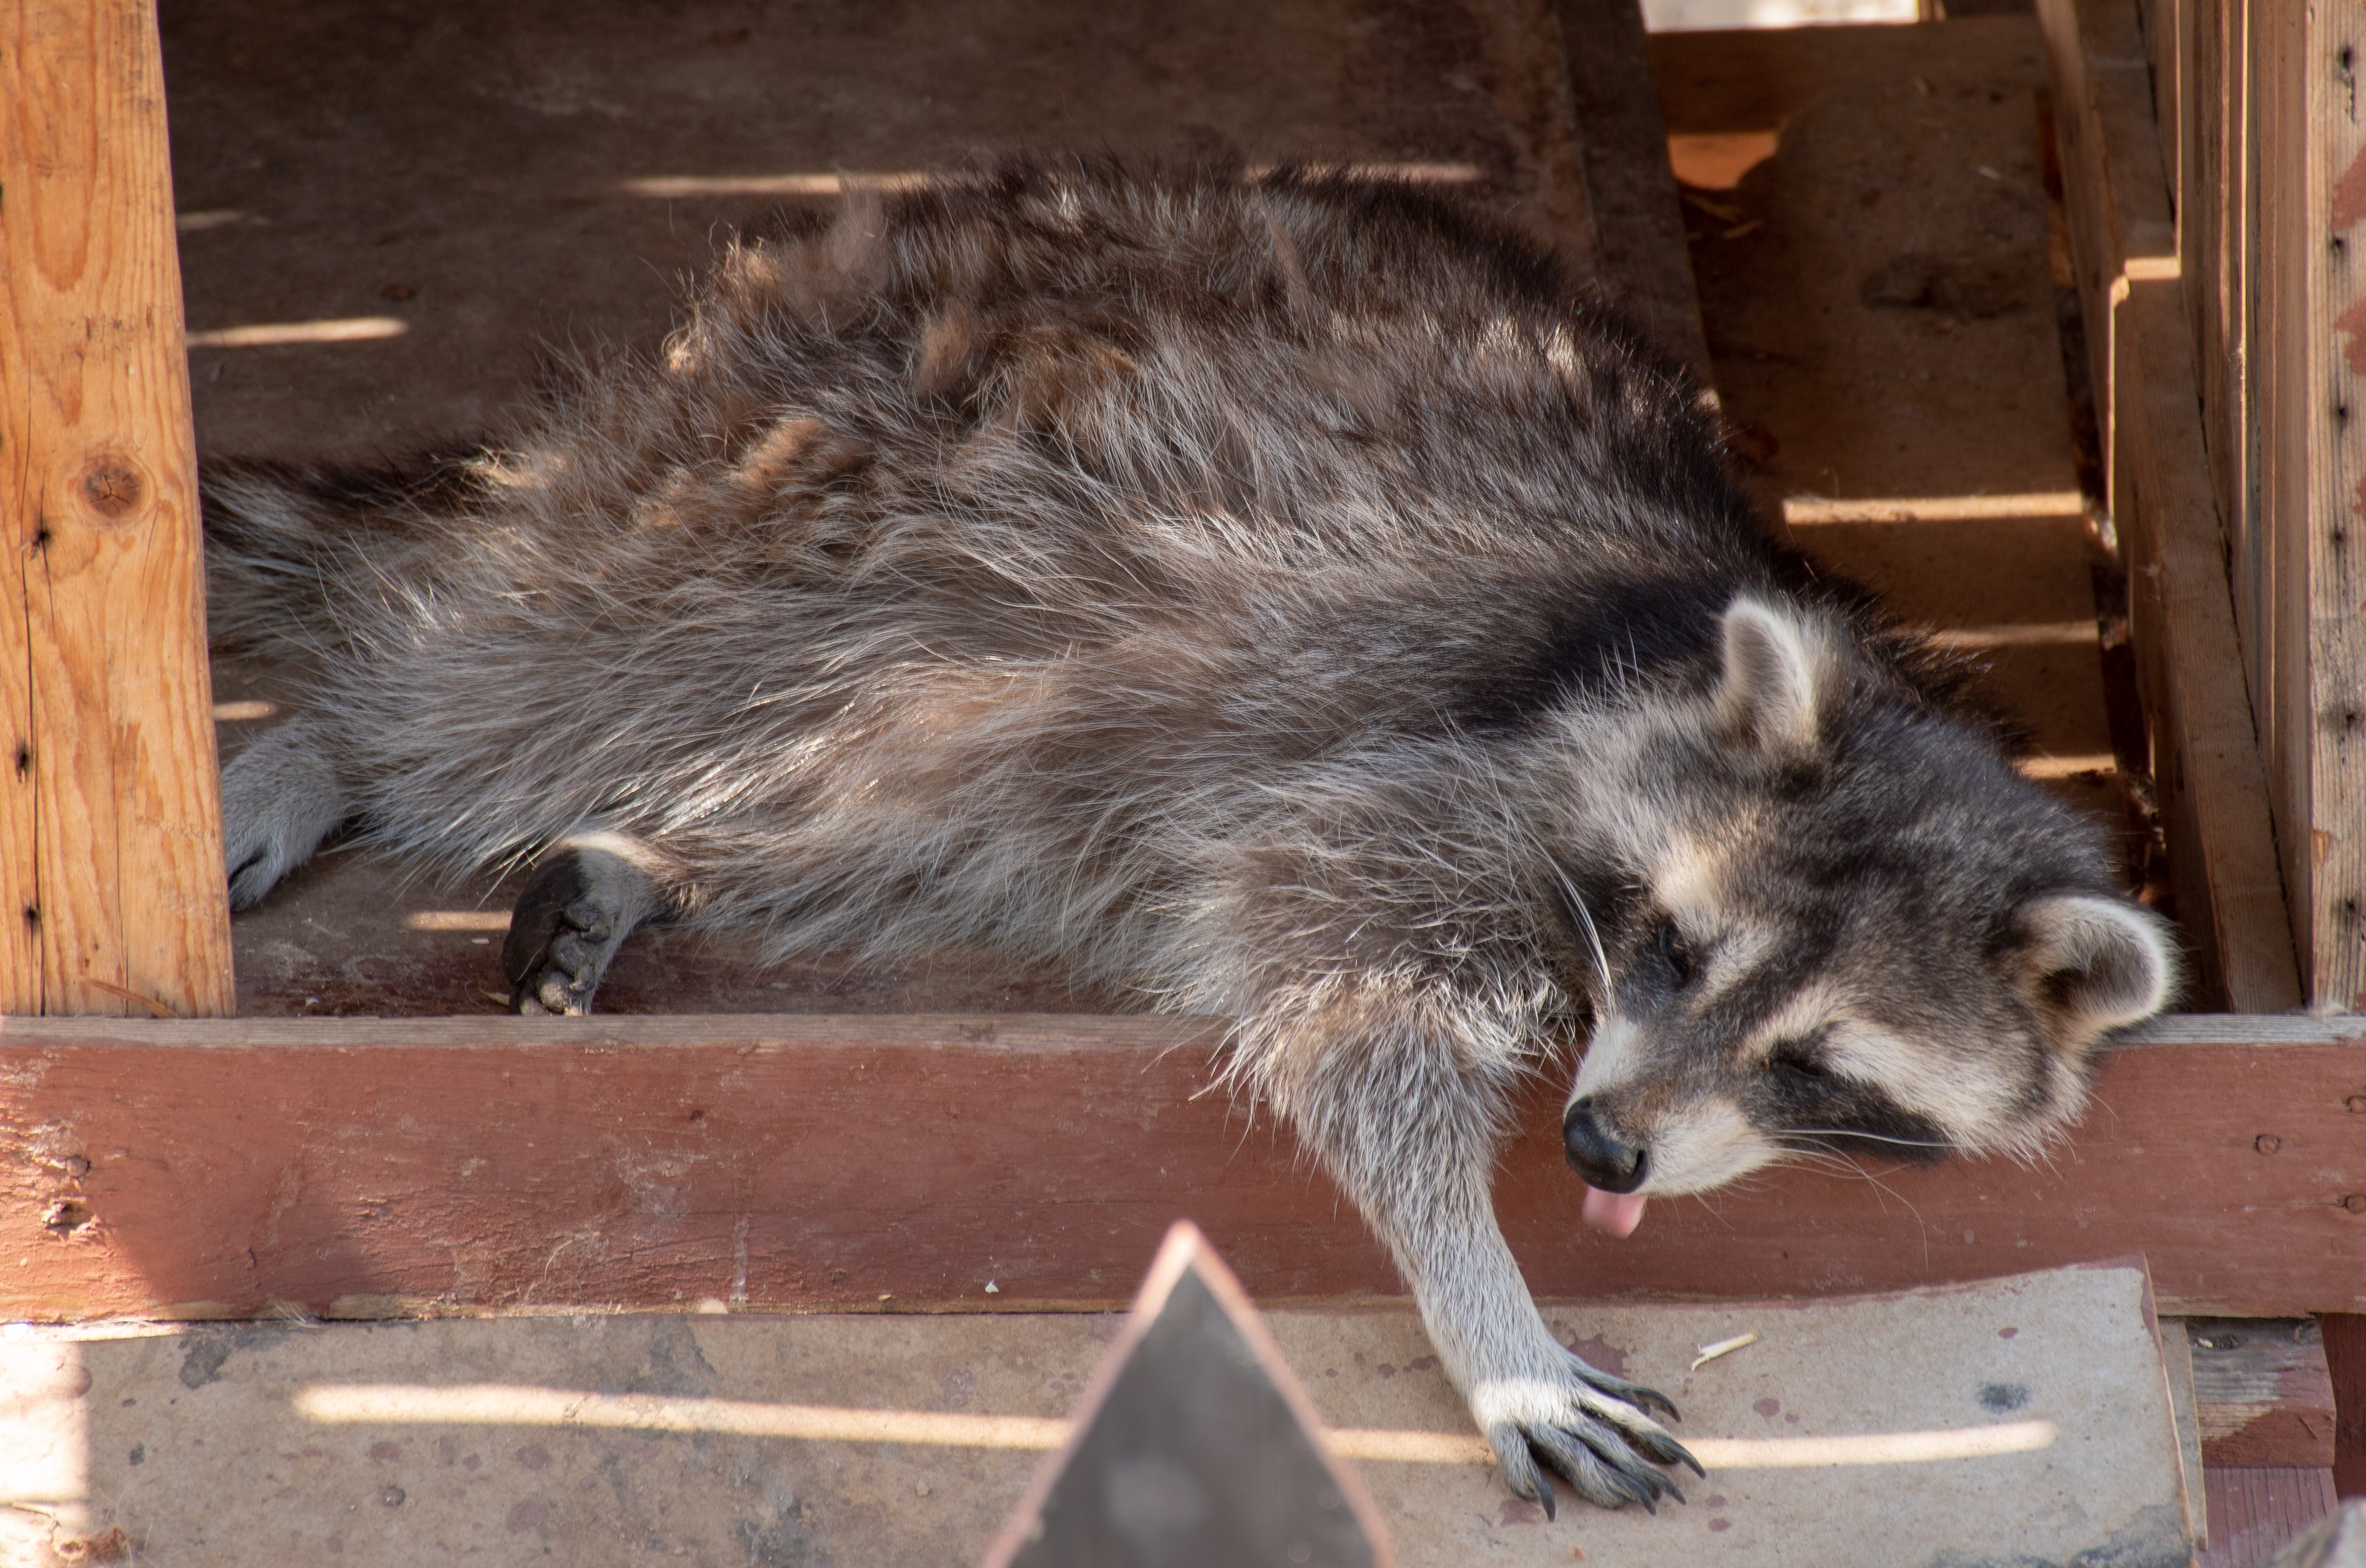 Lethargic raccoon in middle of day, disoriented and approachable